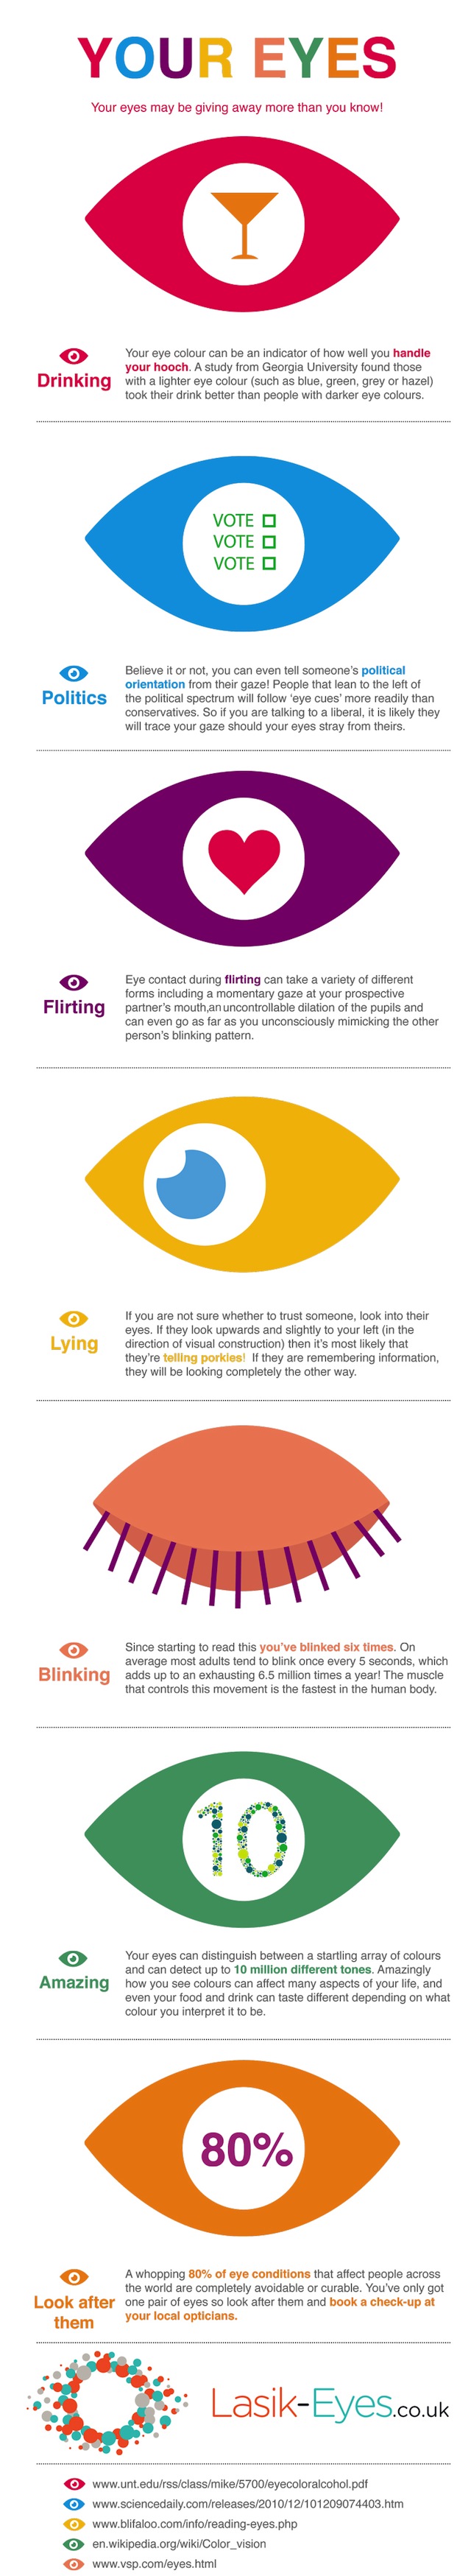 Your Eyes Infographic